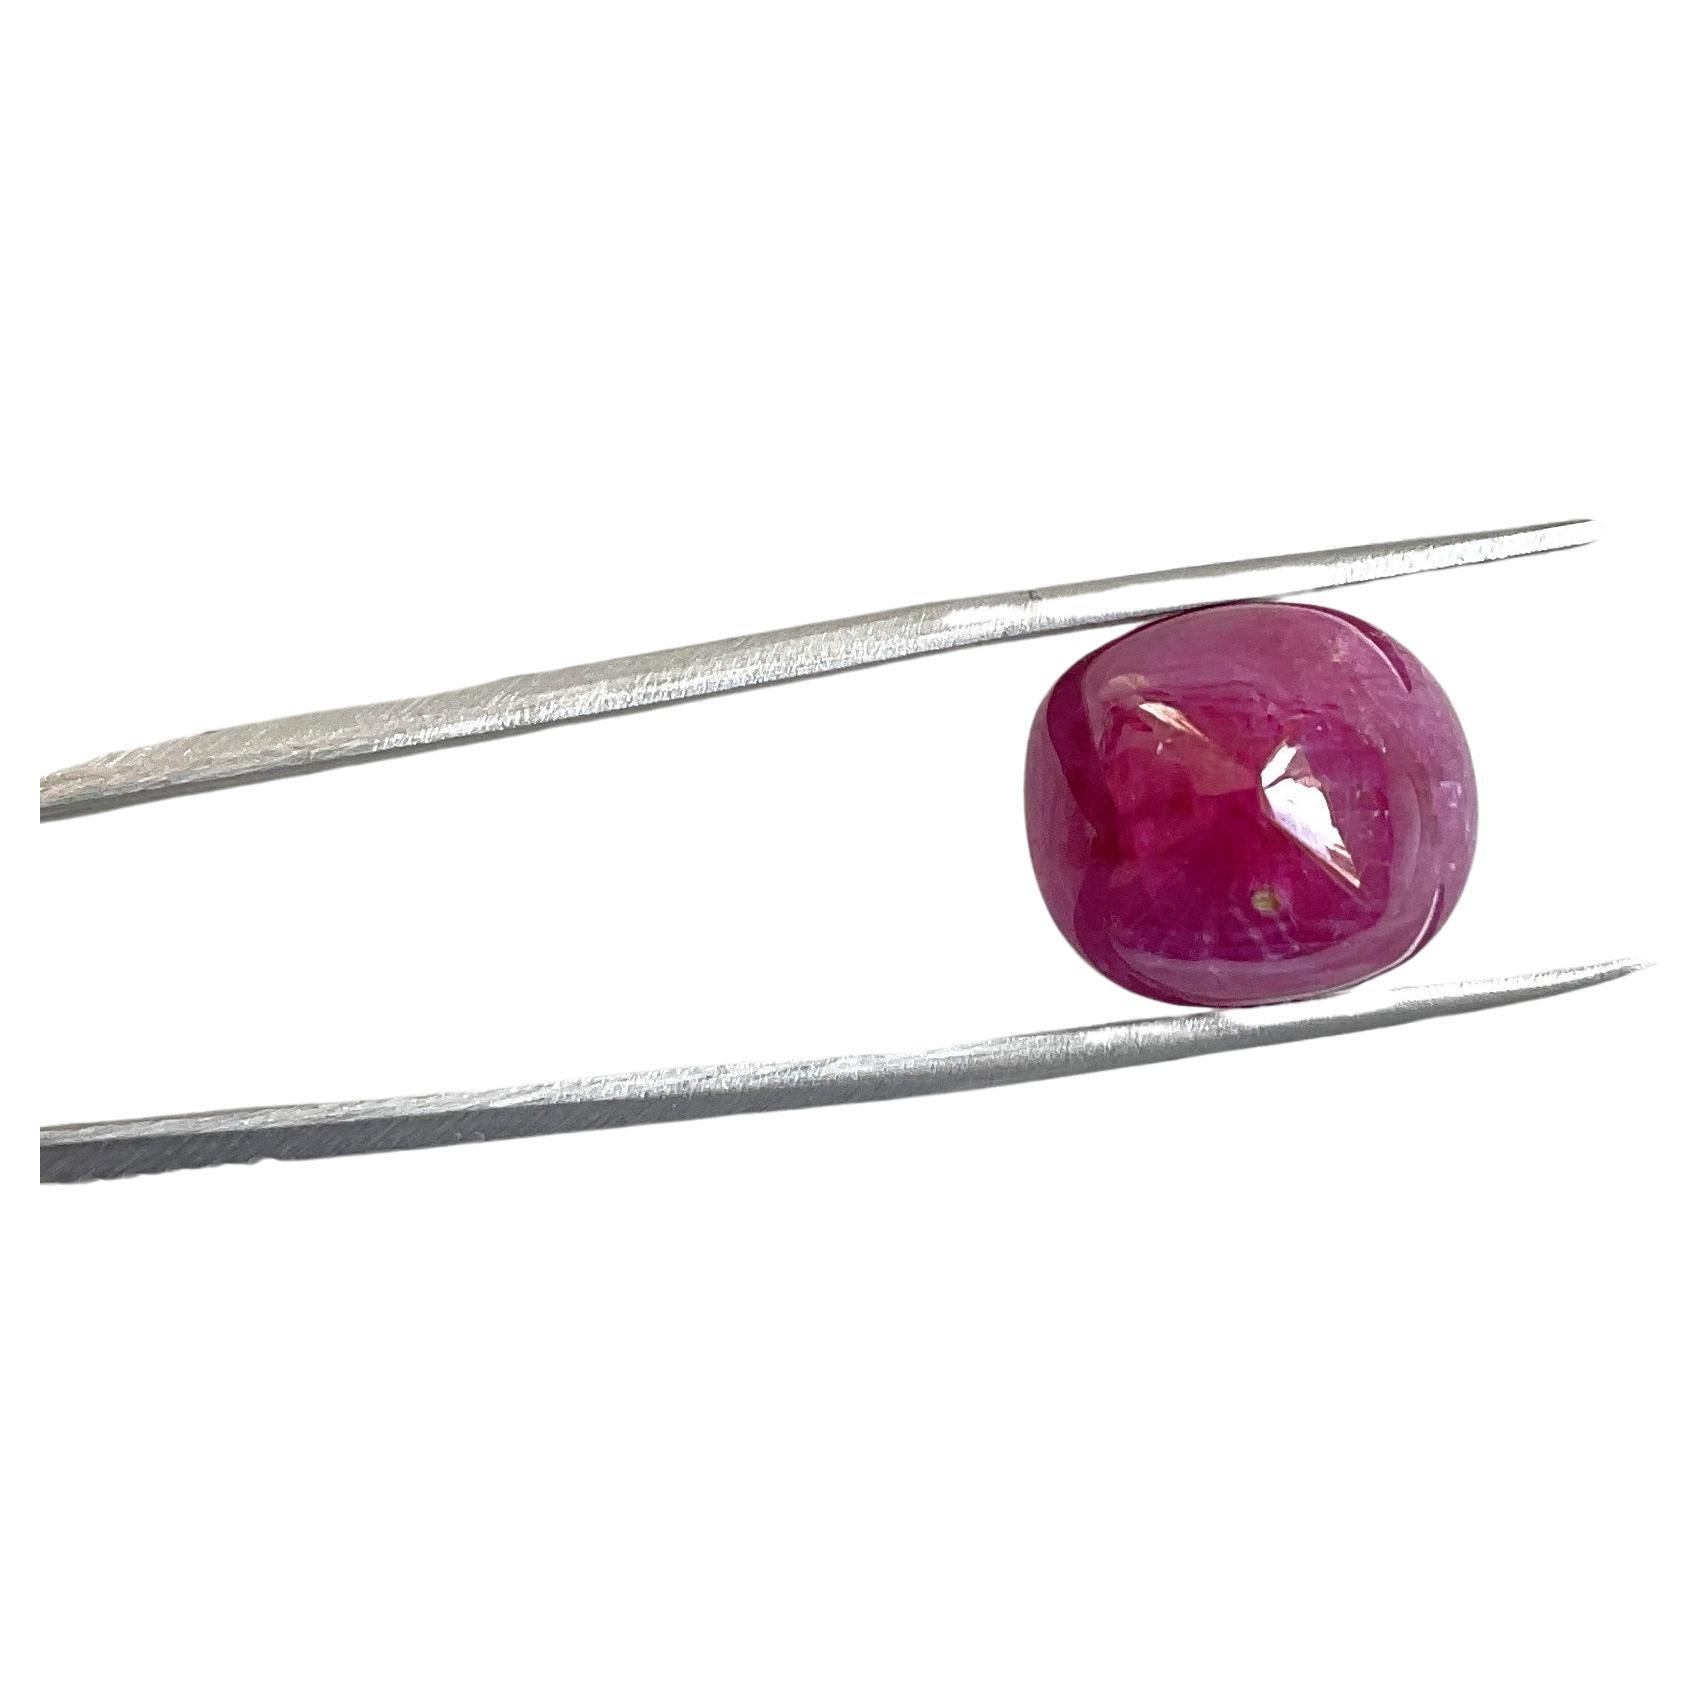 18.52 Carats Burmese No-Heat Ruby Natural Sugarloaf For Top Fine Jewelry Gem

Weight: 18.52 Carats
Size: 15x13 MM
Pieces: 1
Shape: Sugarloaf